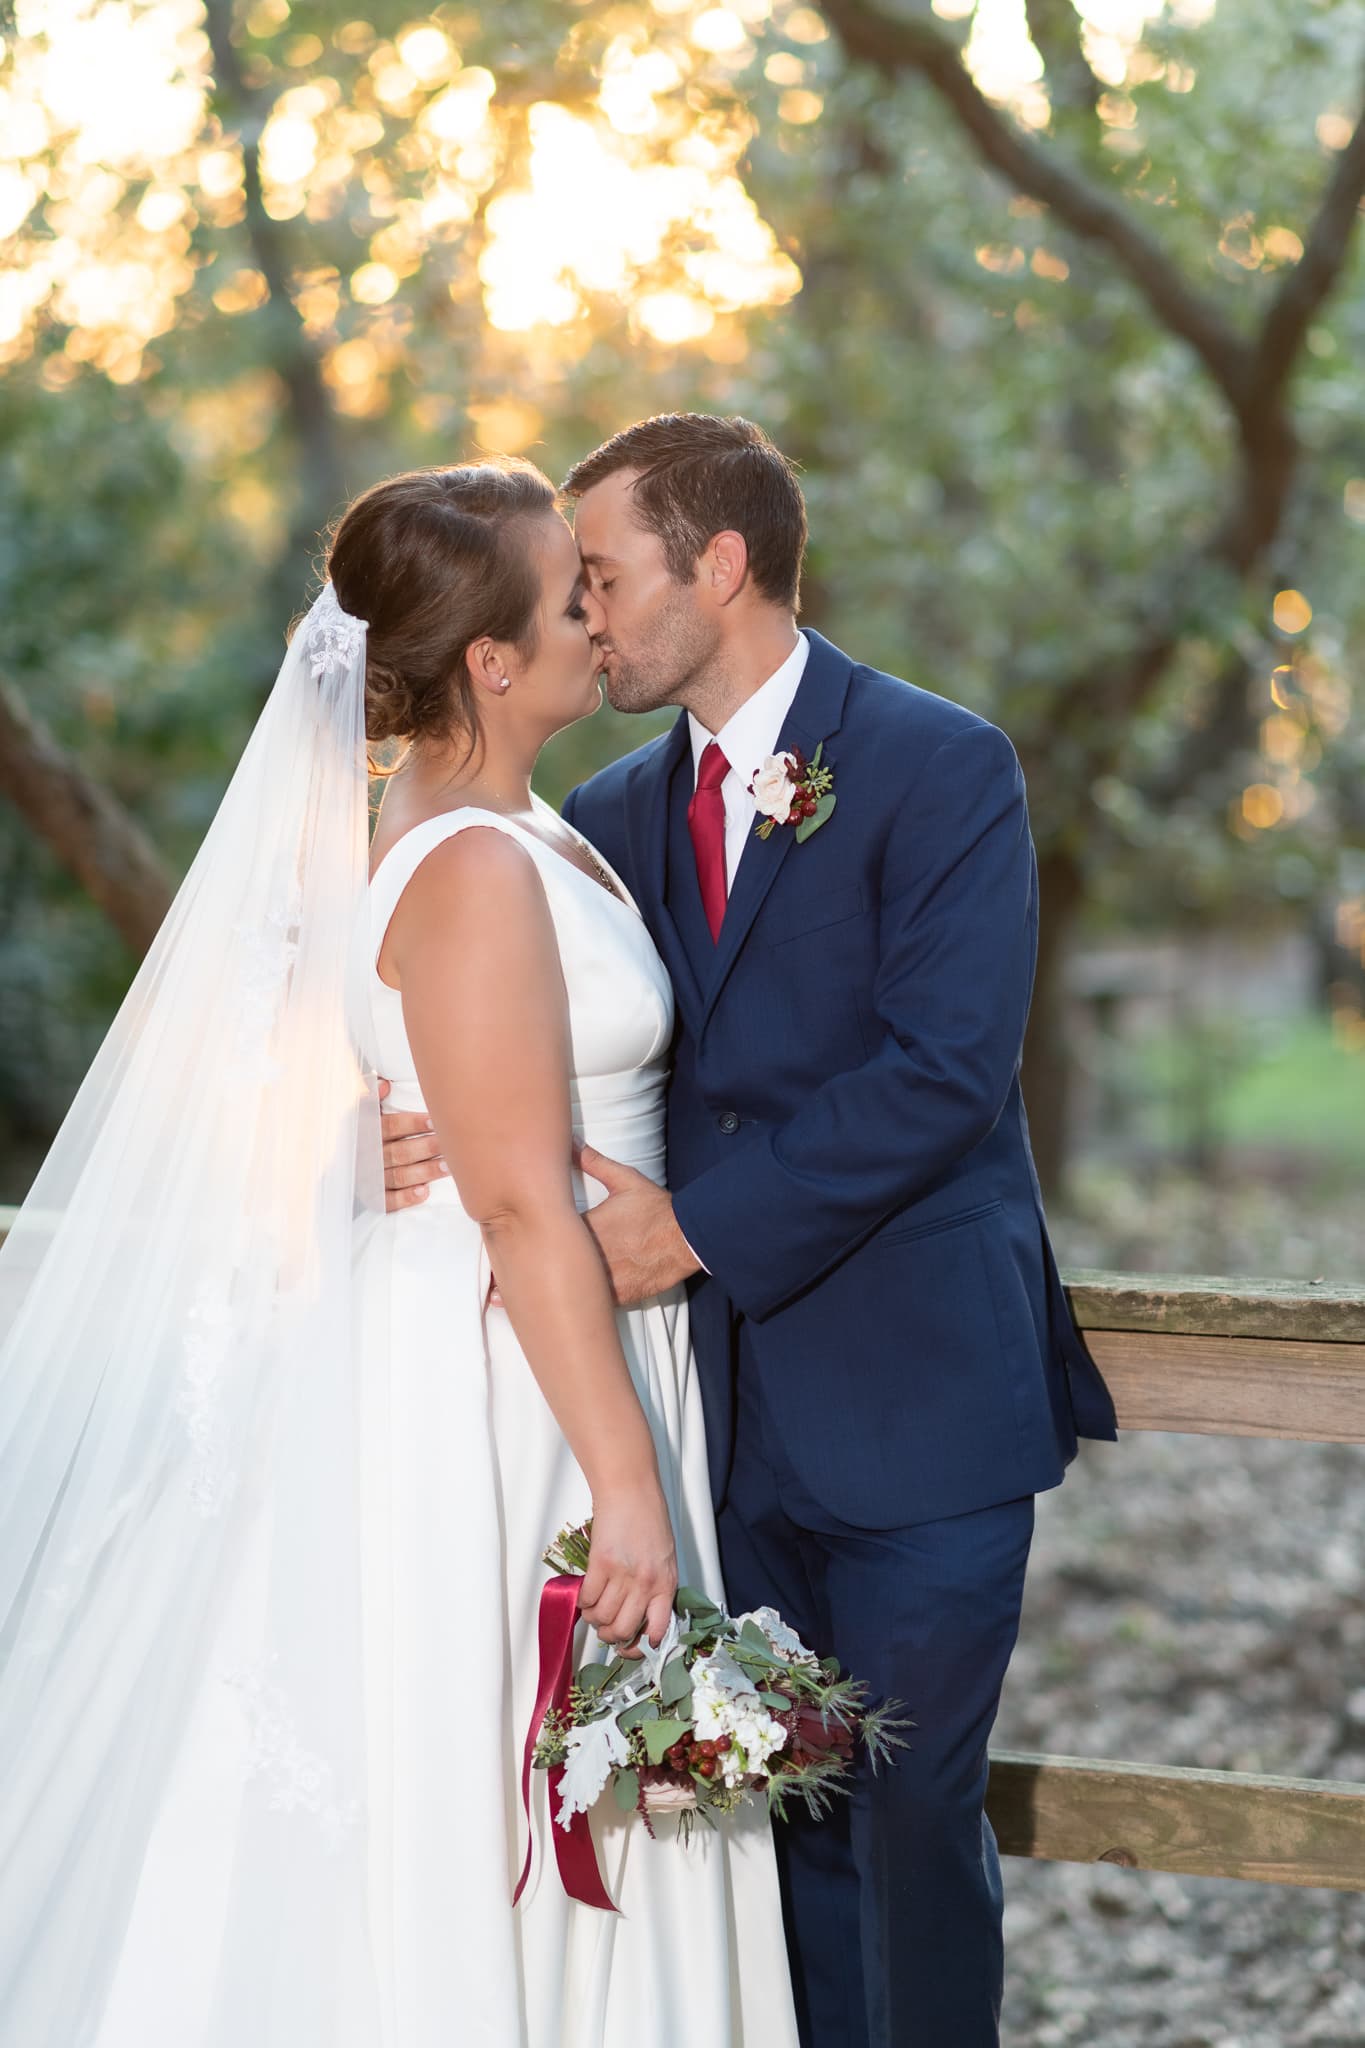 Kiss with sunlight coming through the trees - Pelican Inn - Pawleys Island